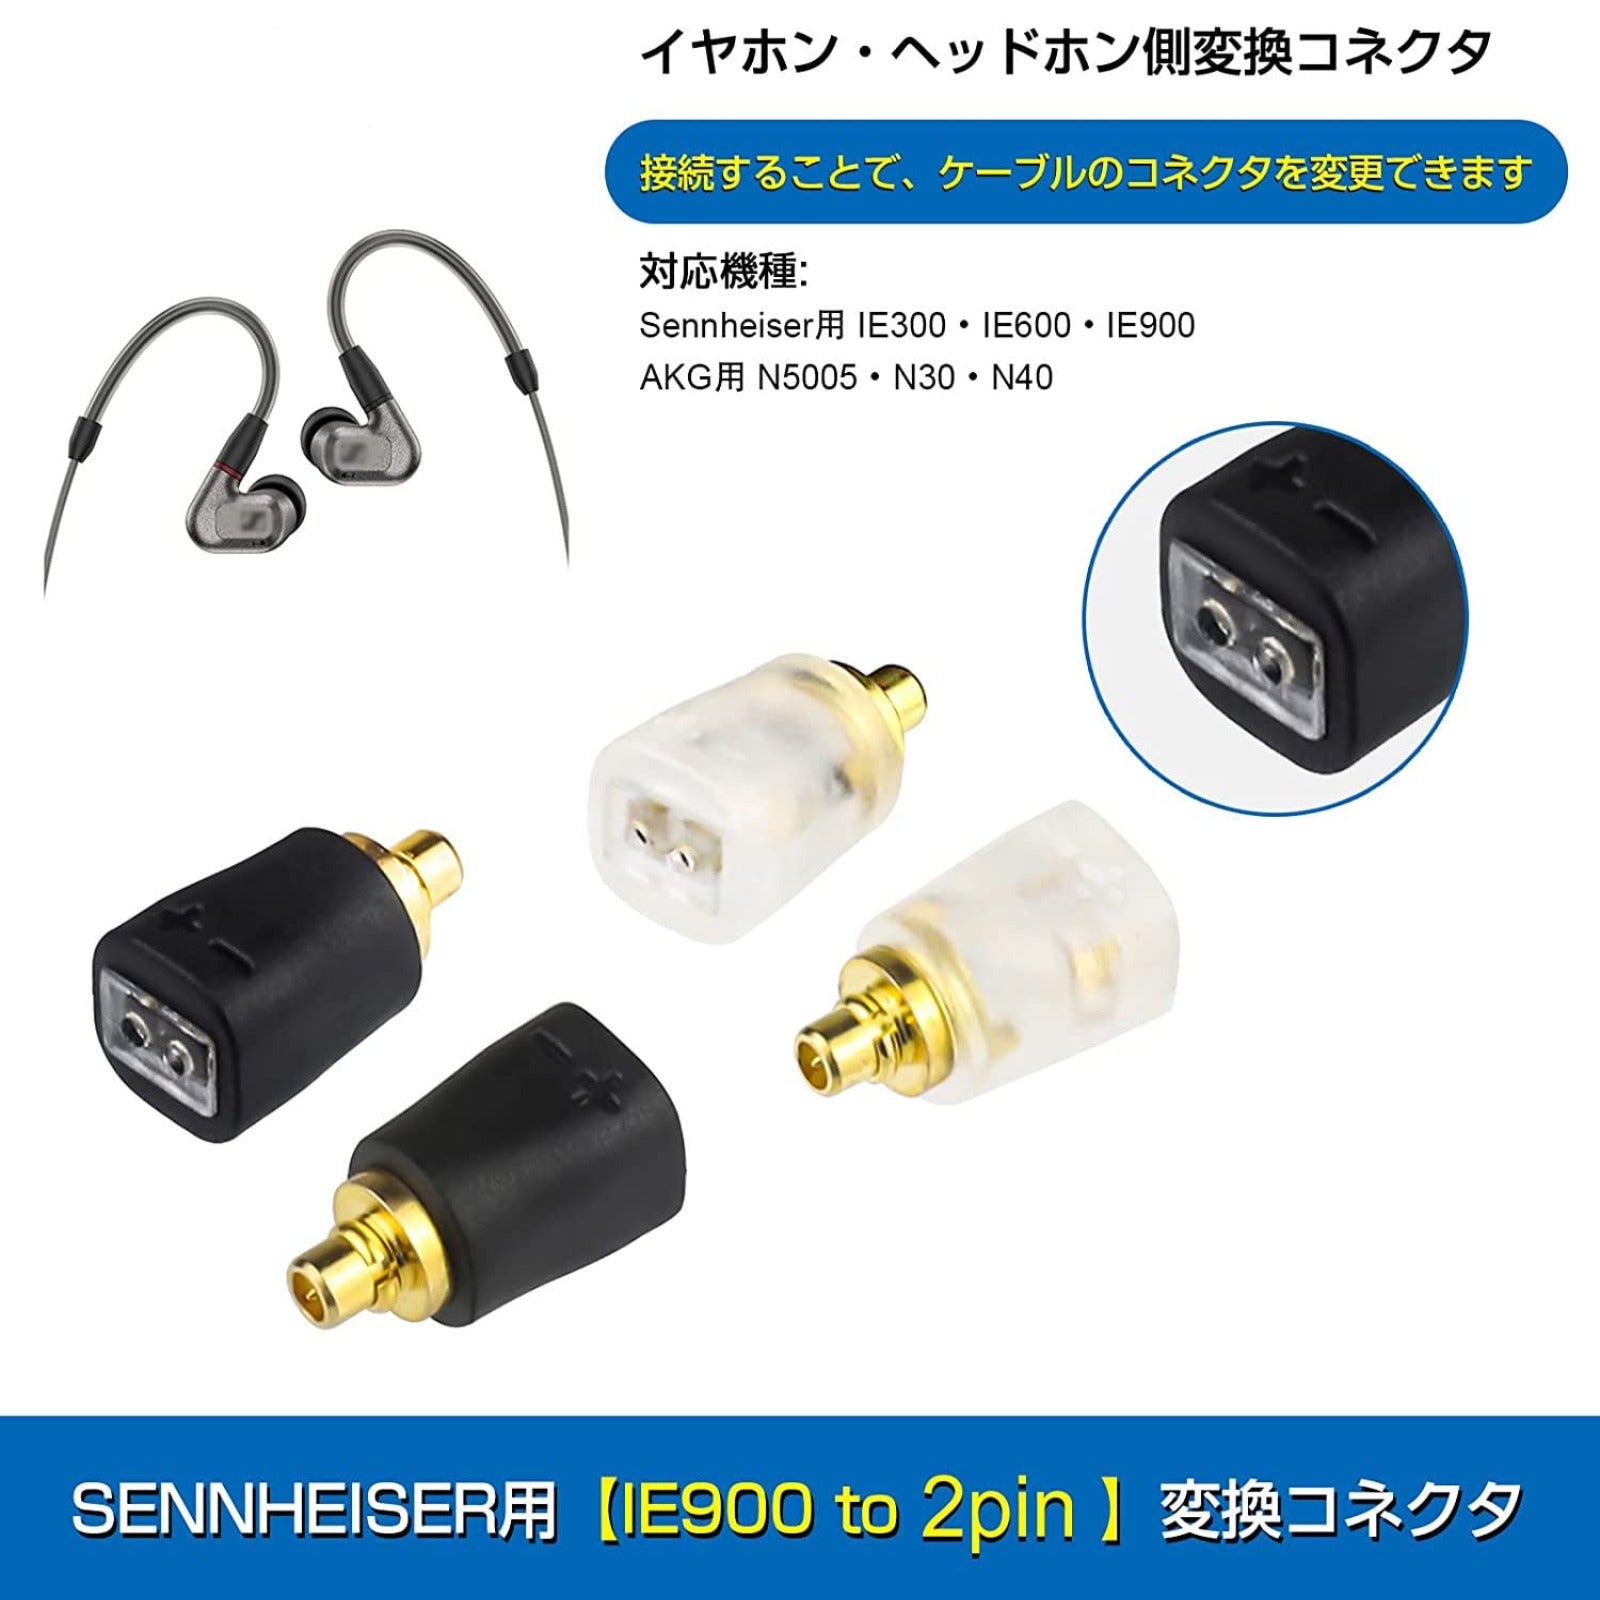 IE300-2Pin 変換コネクター コネクターキット ゼンハイザー用 IE300/900用（オス） - 2Pinコネクタ 0.78mm（メ